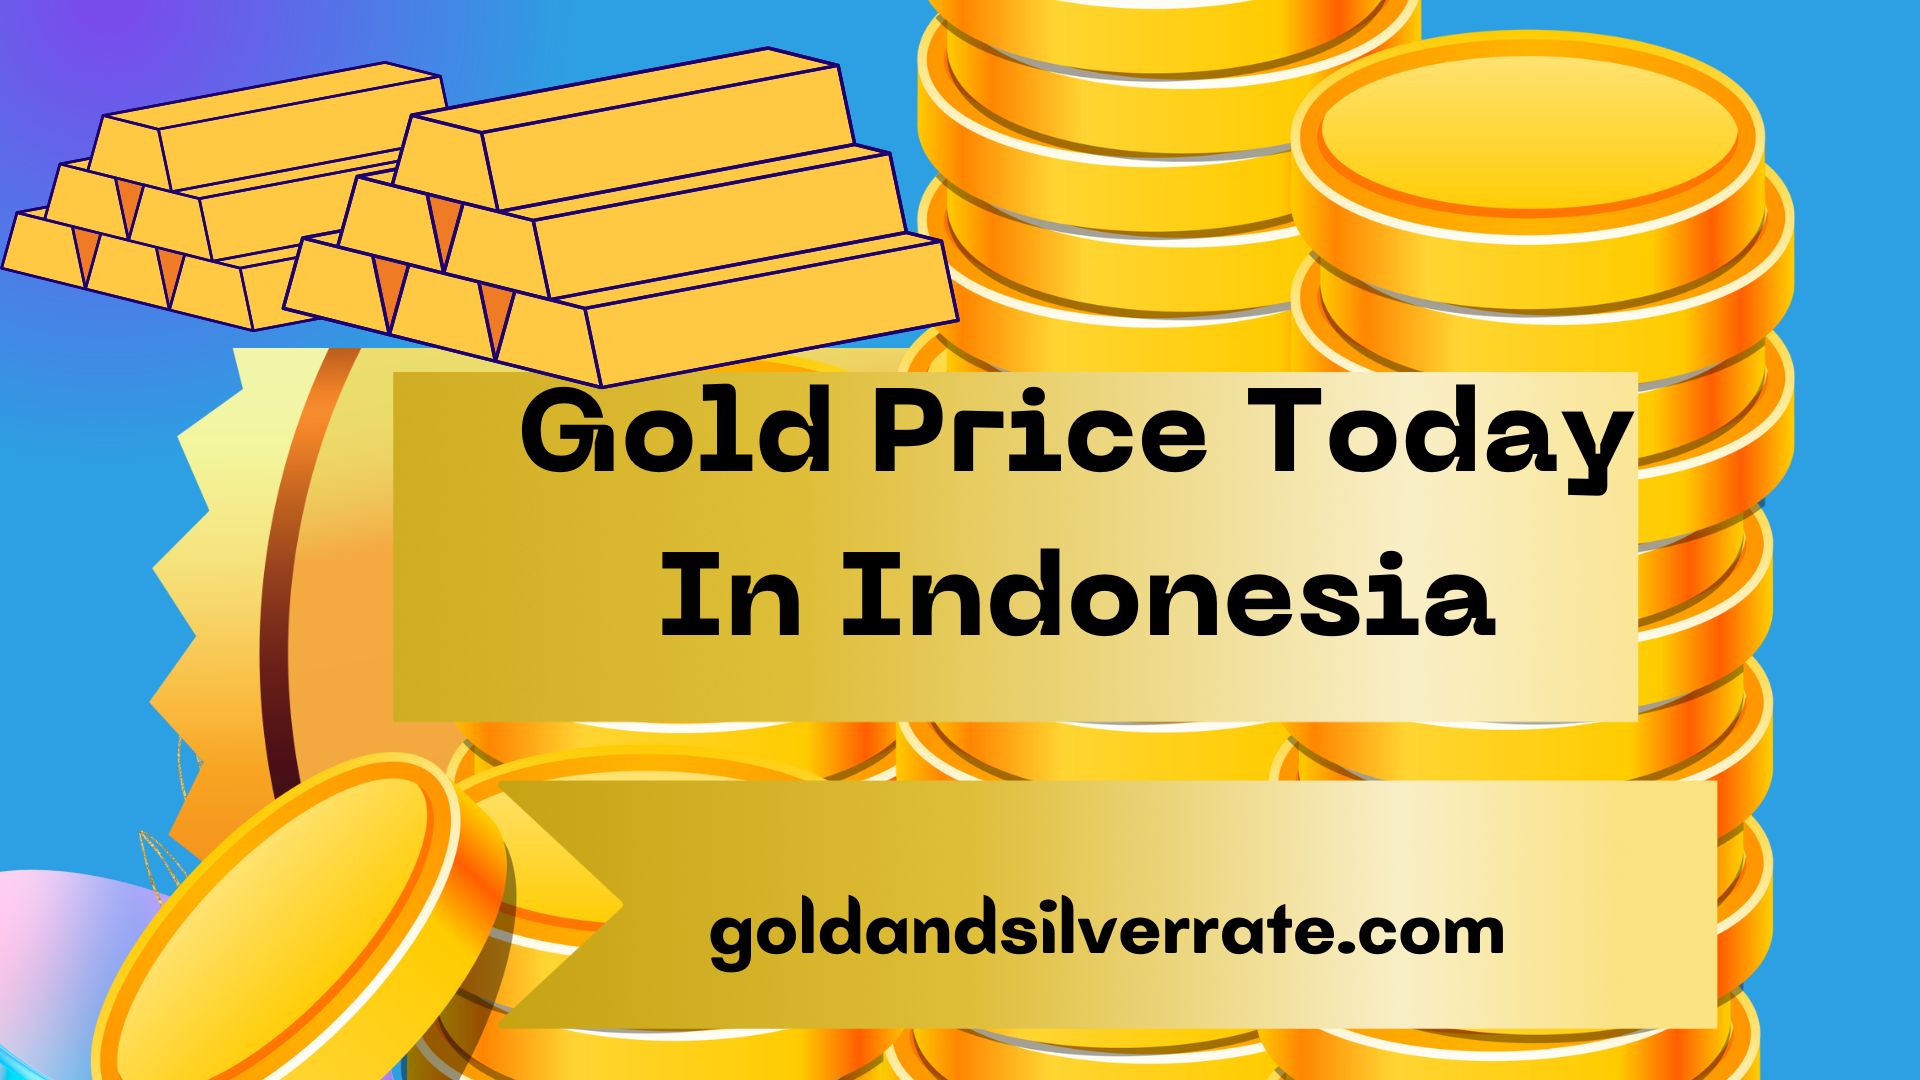 GOLD PRICE TODAY IN INDONESIA